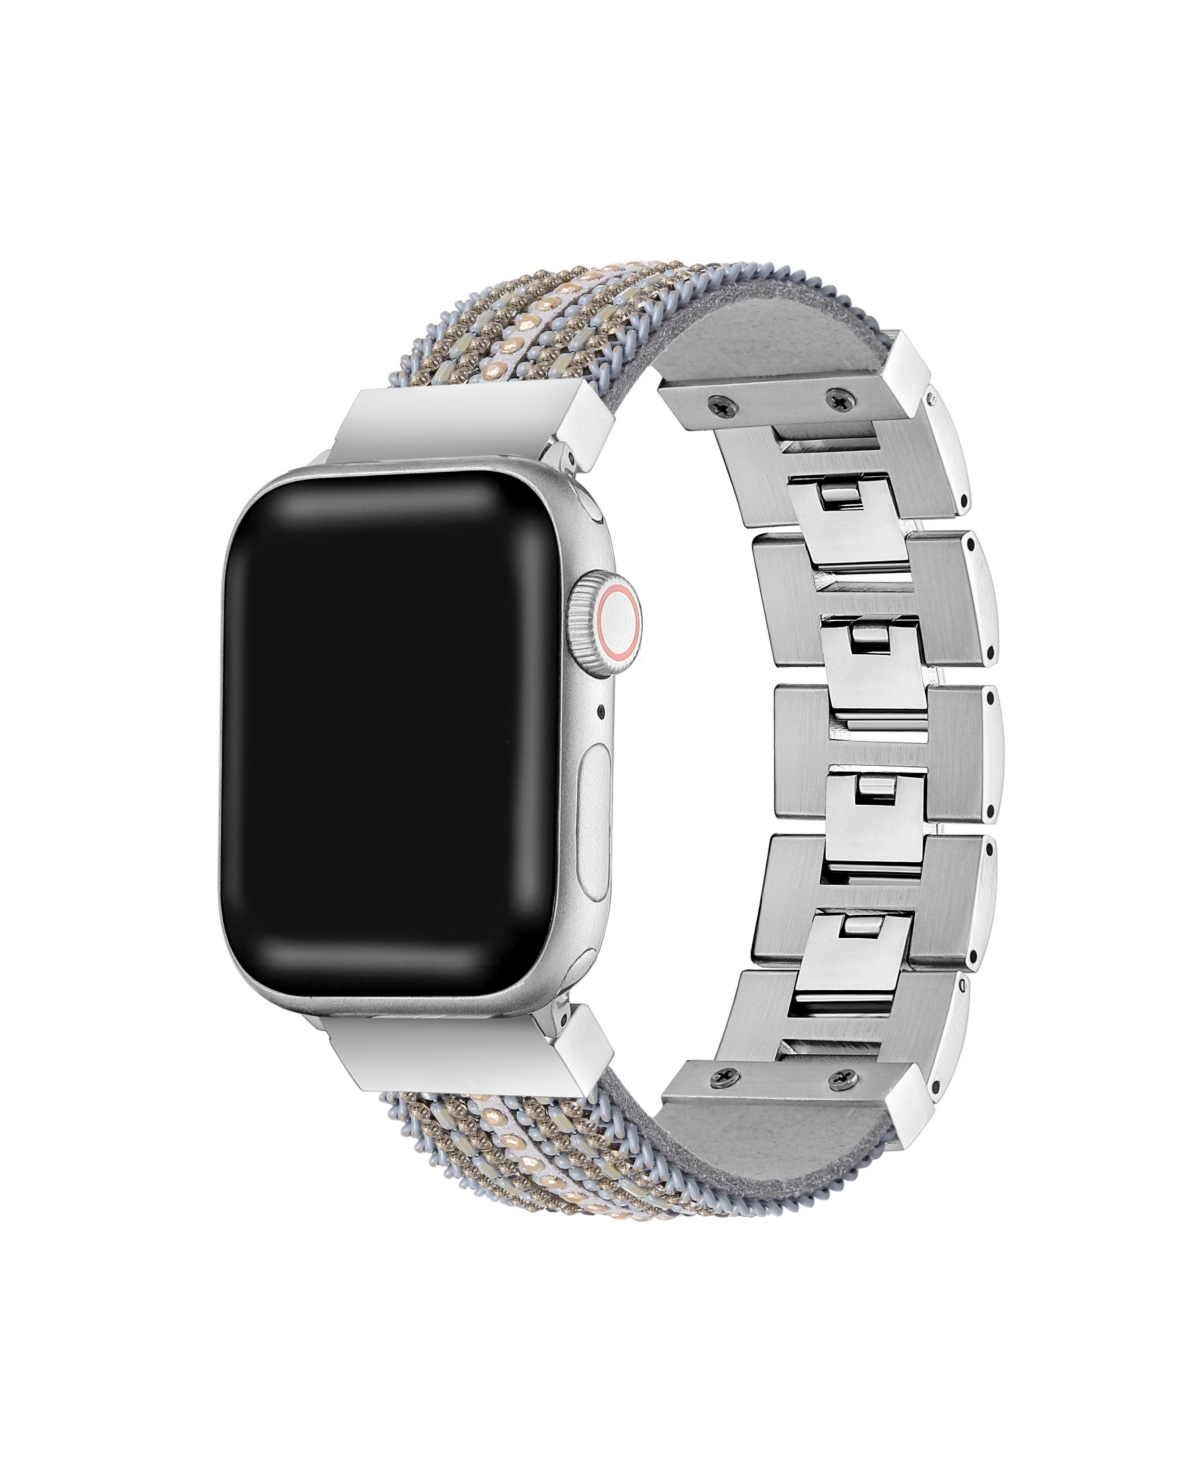 Posh Tech Men's And Women's Black Silver-tone Jewelry Band For Apple Watch 38mm In Assorted